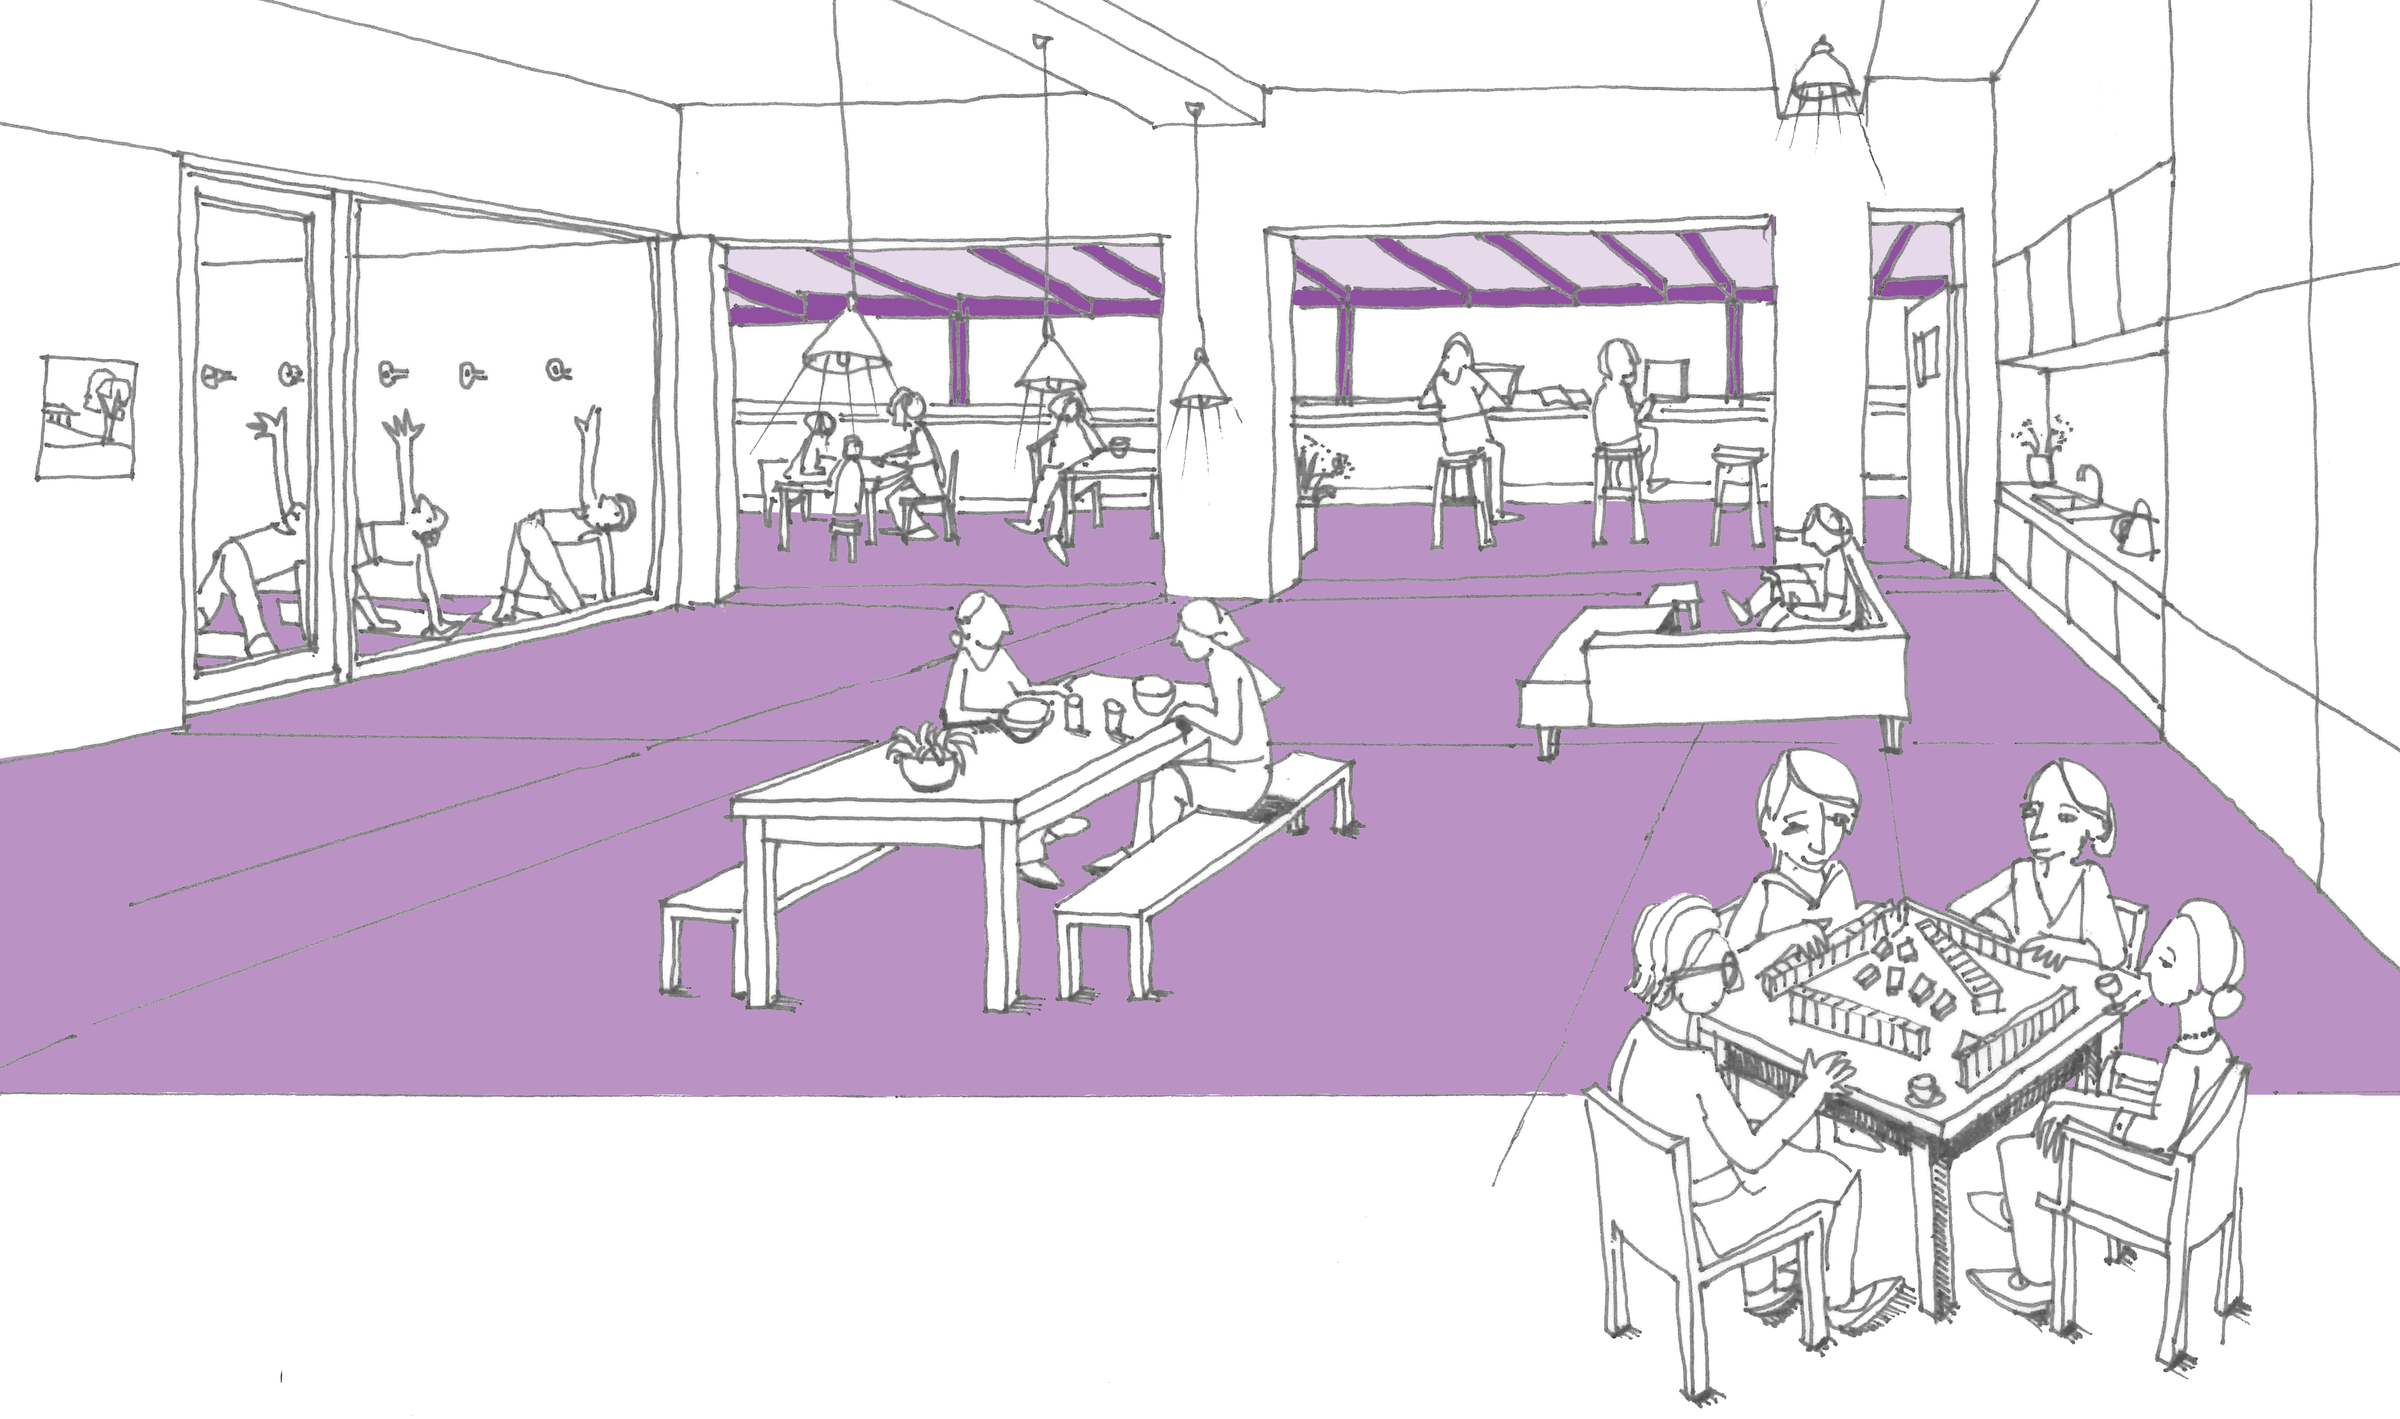 Sketch of communal indoor space from 'A Design Guide for Older Women's Housing'